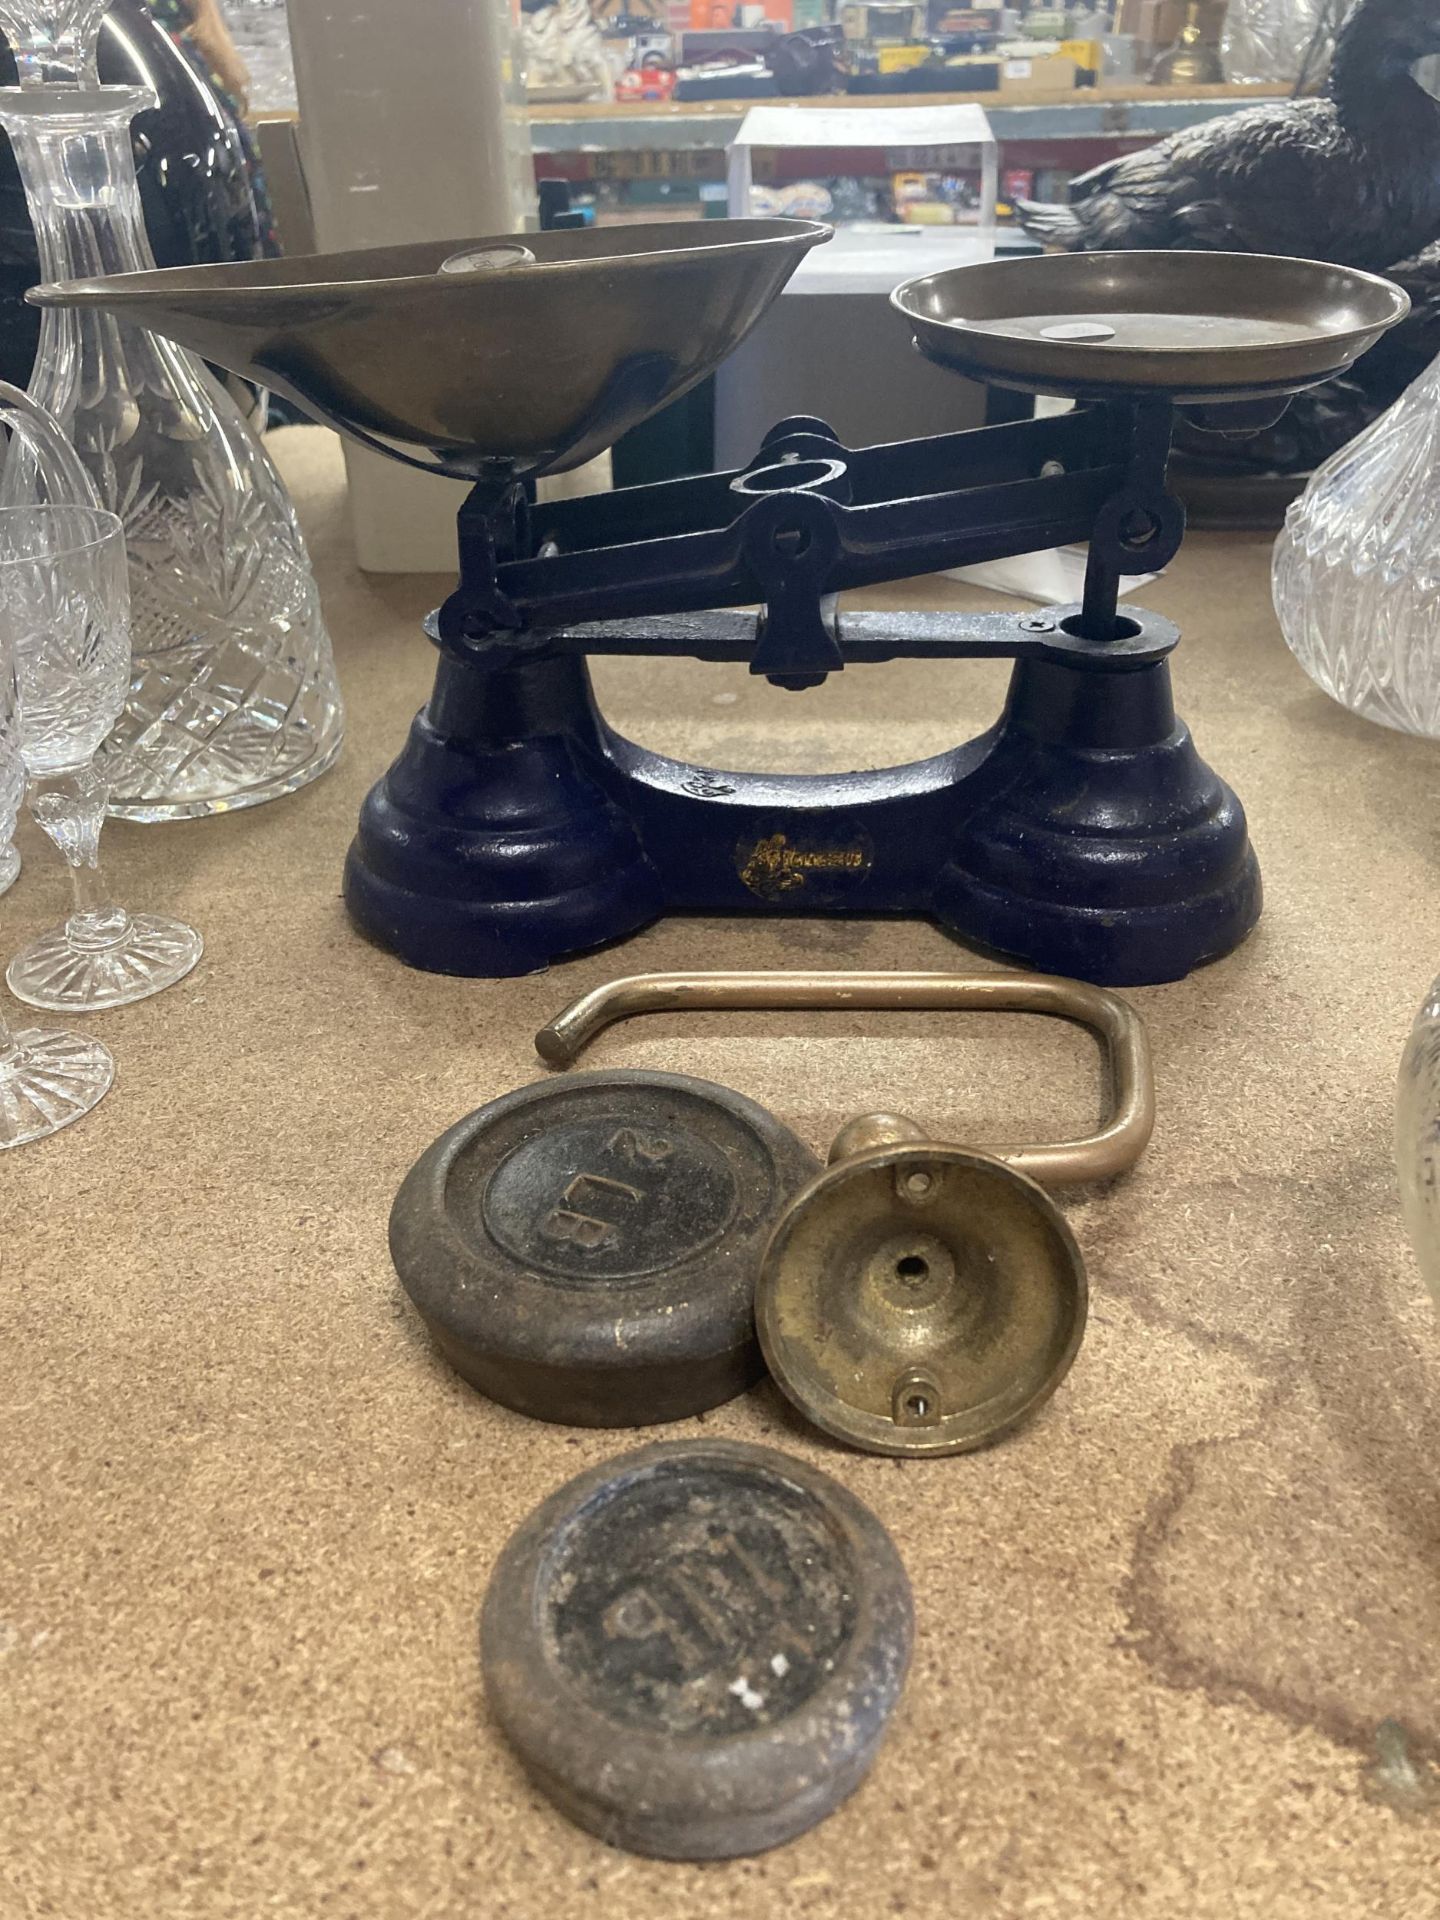 A VINTAGE SET OF SCALES WITH BRASS PANS AND WEIGHTS